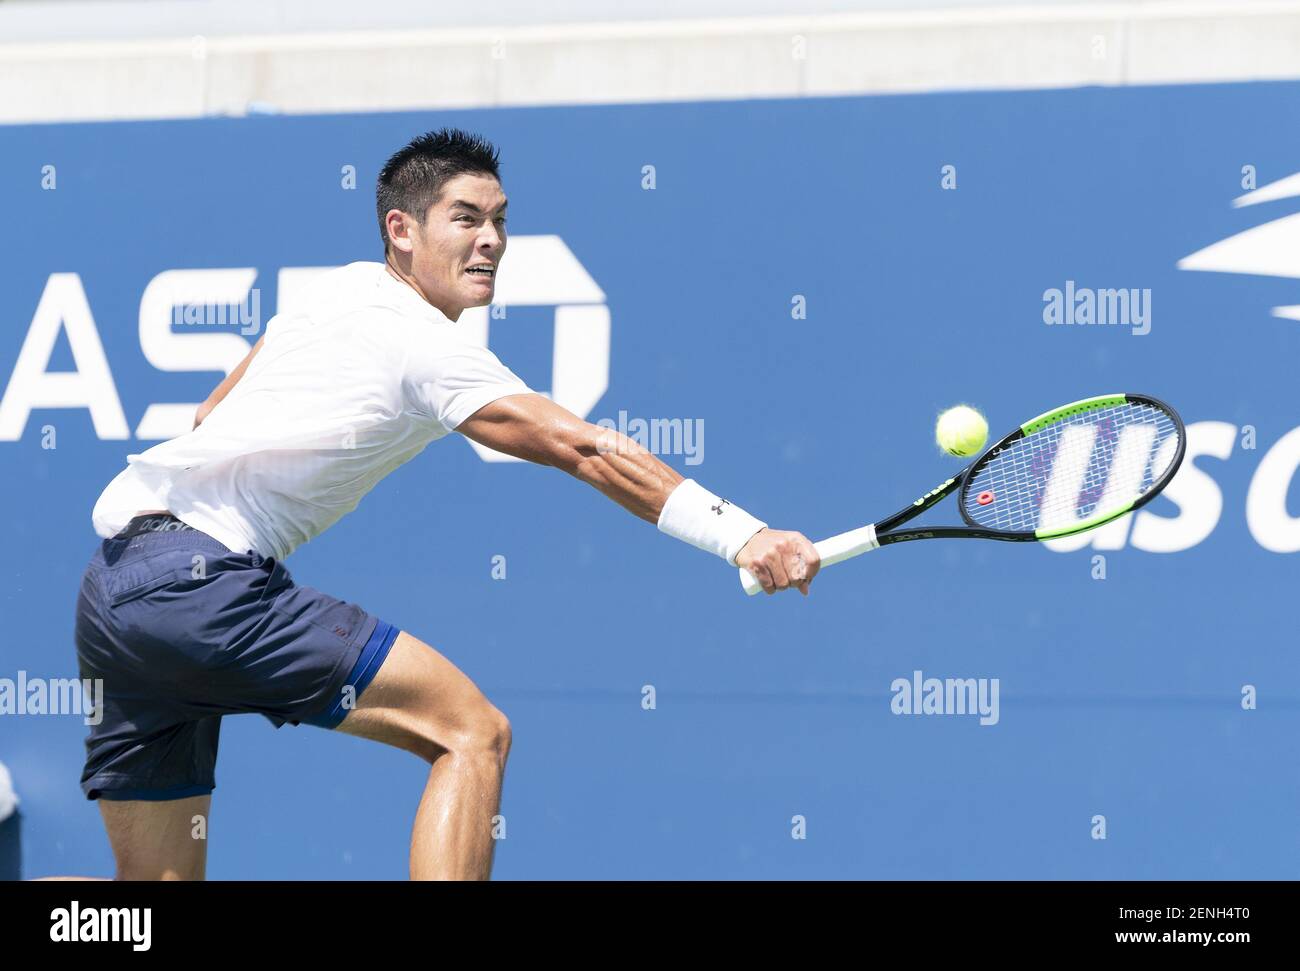 Thai-Son Kwiatkowski (USA) returns ball during qualifying round 1 of US  Open Tennis Championship against Mikael Ymer (Sweden) at Billie Jean King  National Tennis Center in New York, NY on August 19,